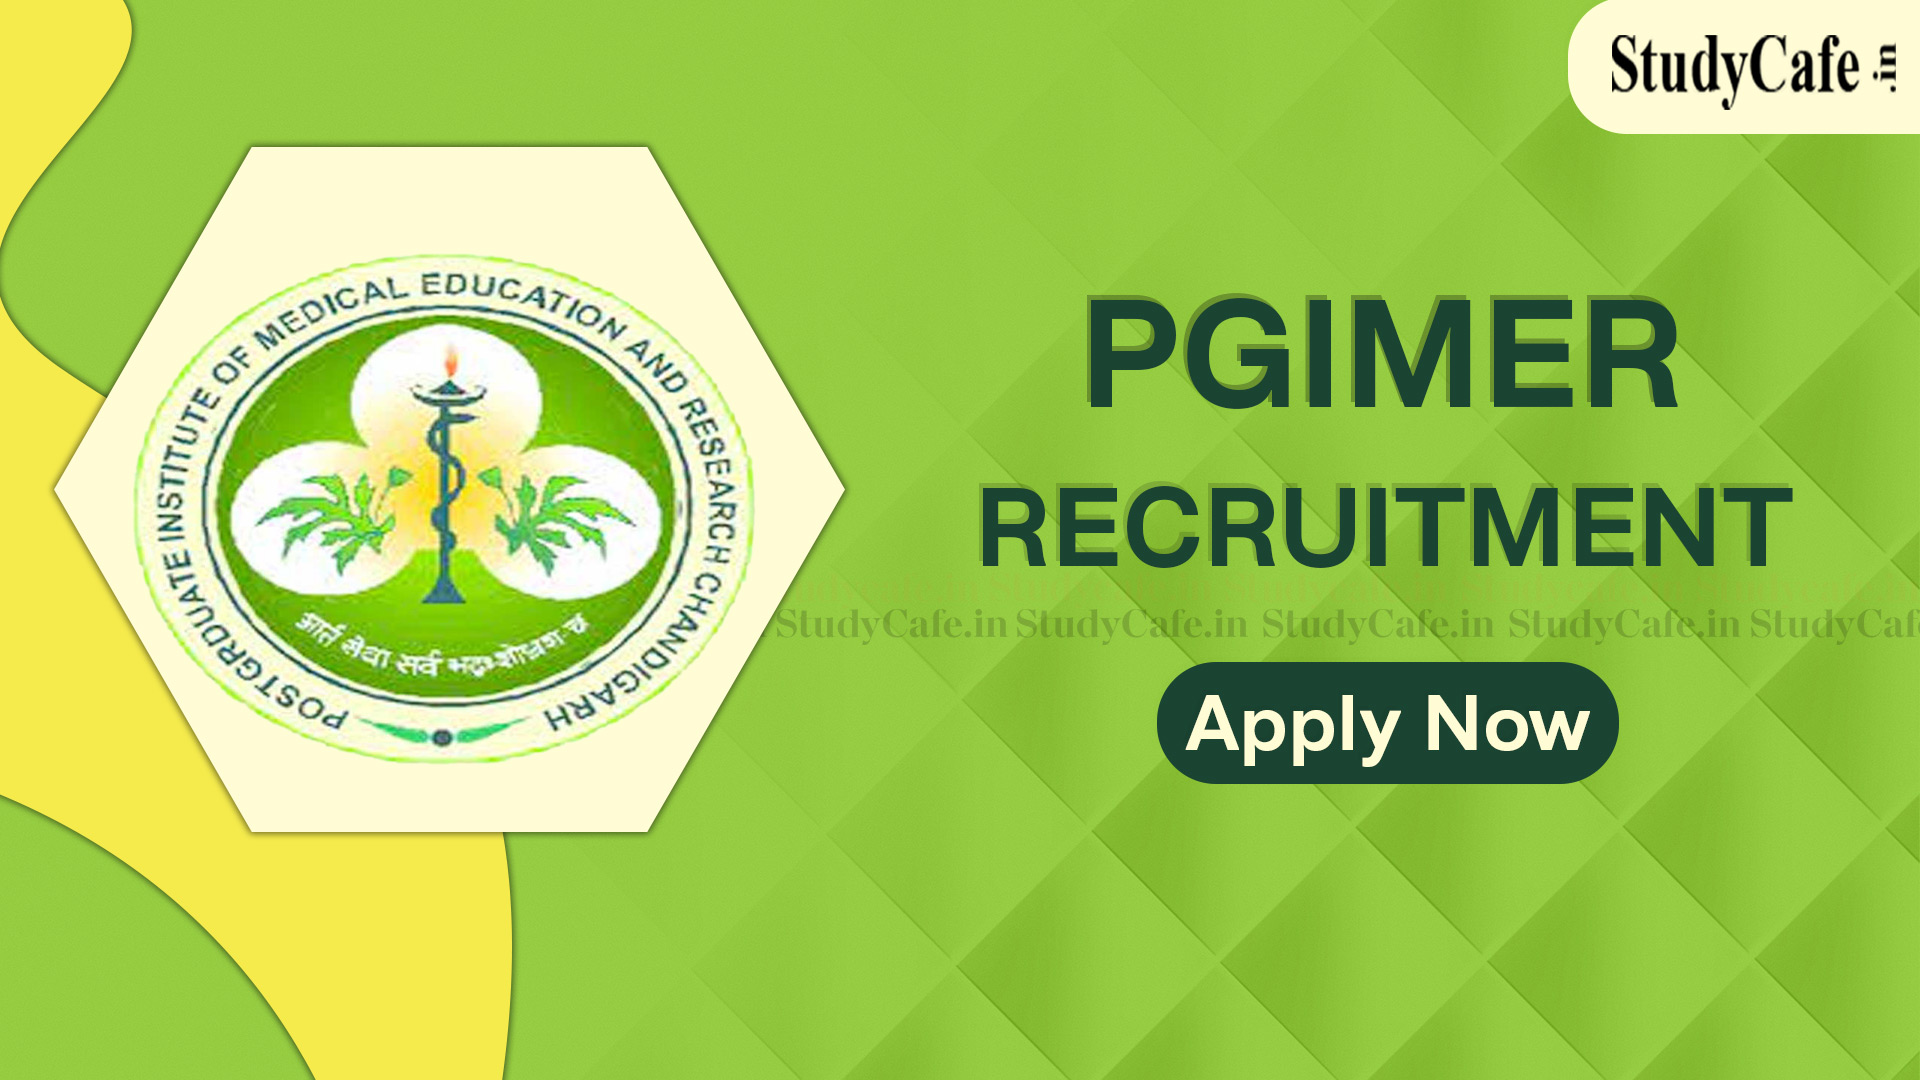 PGIMER Recruitment 2022: Check Post, Qualifications, How to Apply, and Other Details Here